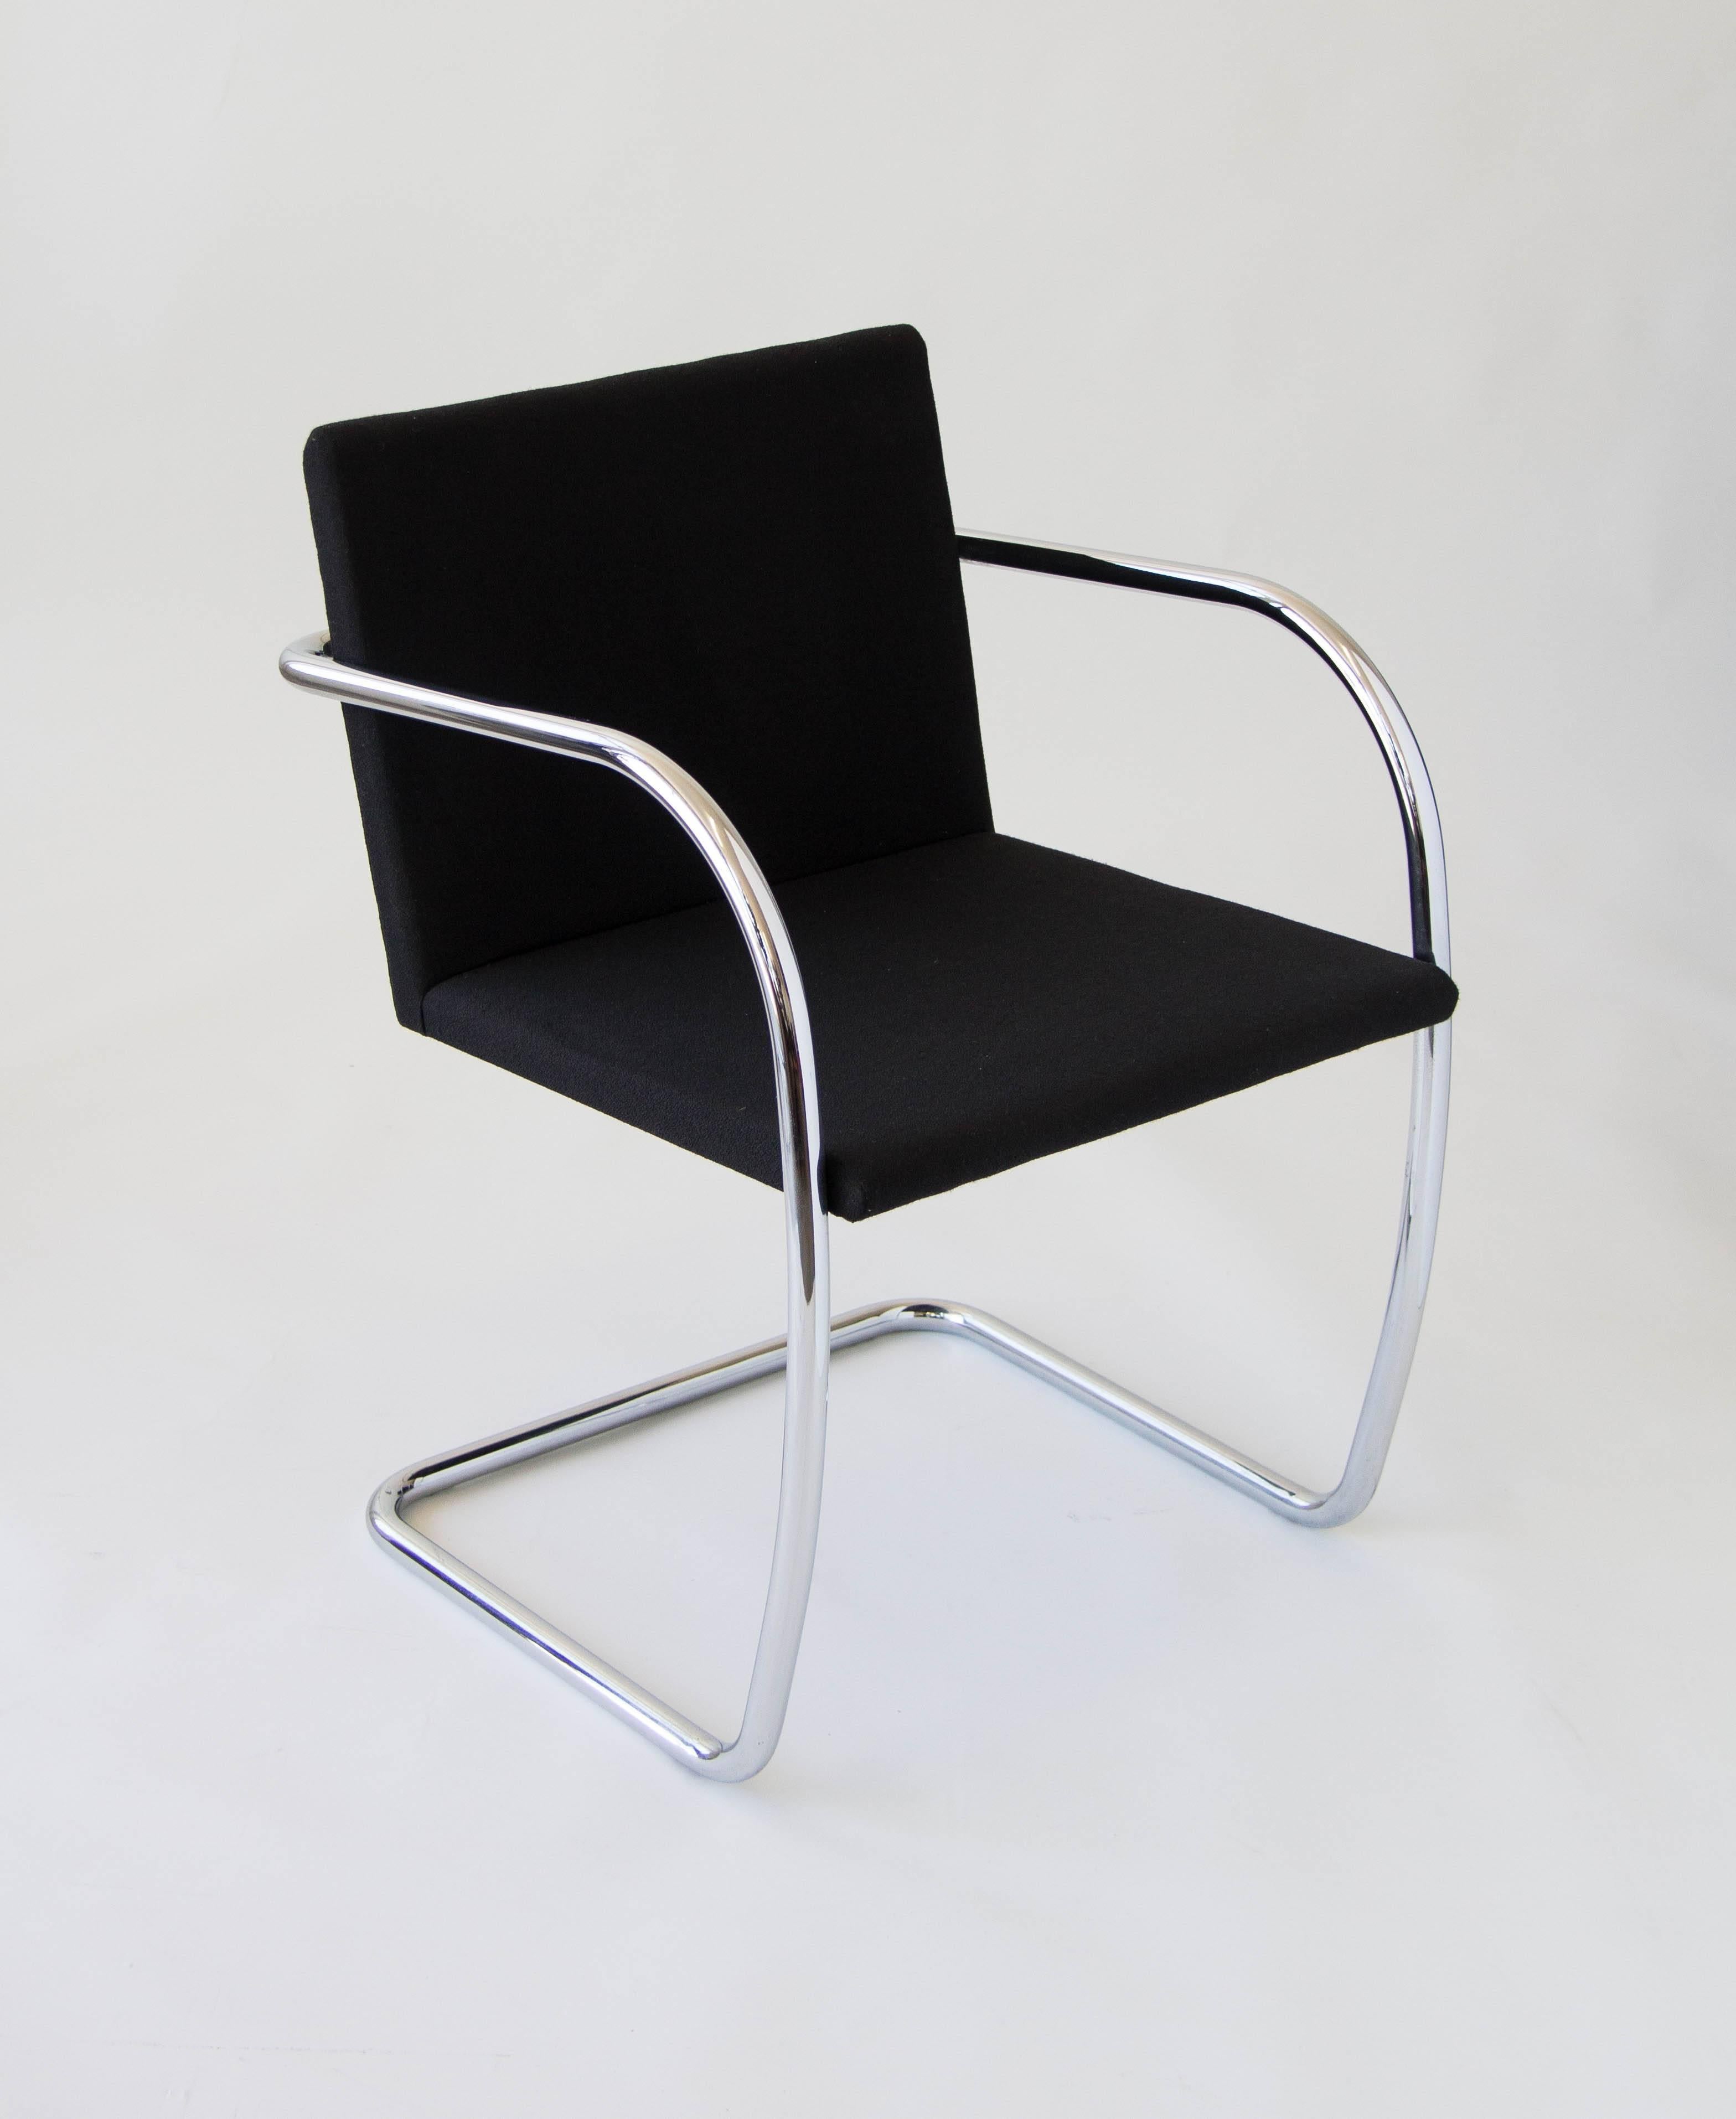 Designed in 1930 by Ludwig Mies van der Rohe for the Tugendhat House in Brno, Czech Republic, these were produced by Knoll International in Italy. Each chair has a cantilevered tubular steel frame and a floating seat in the original black